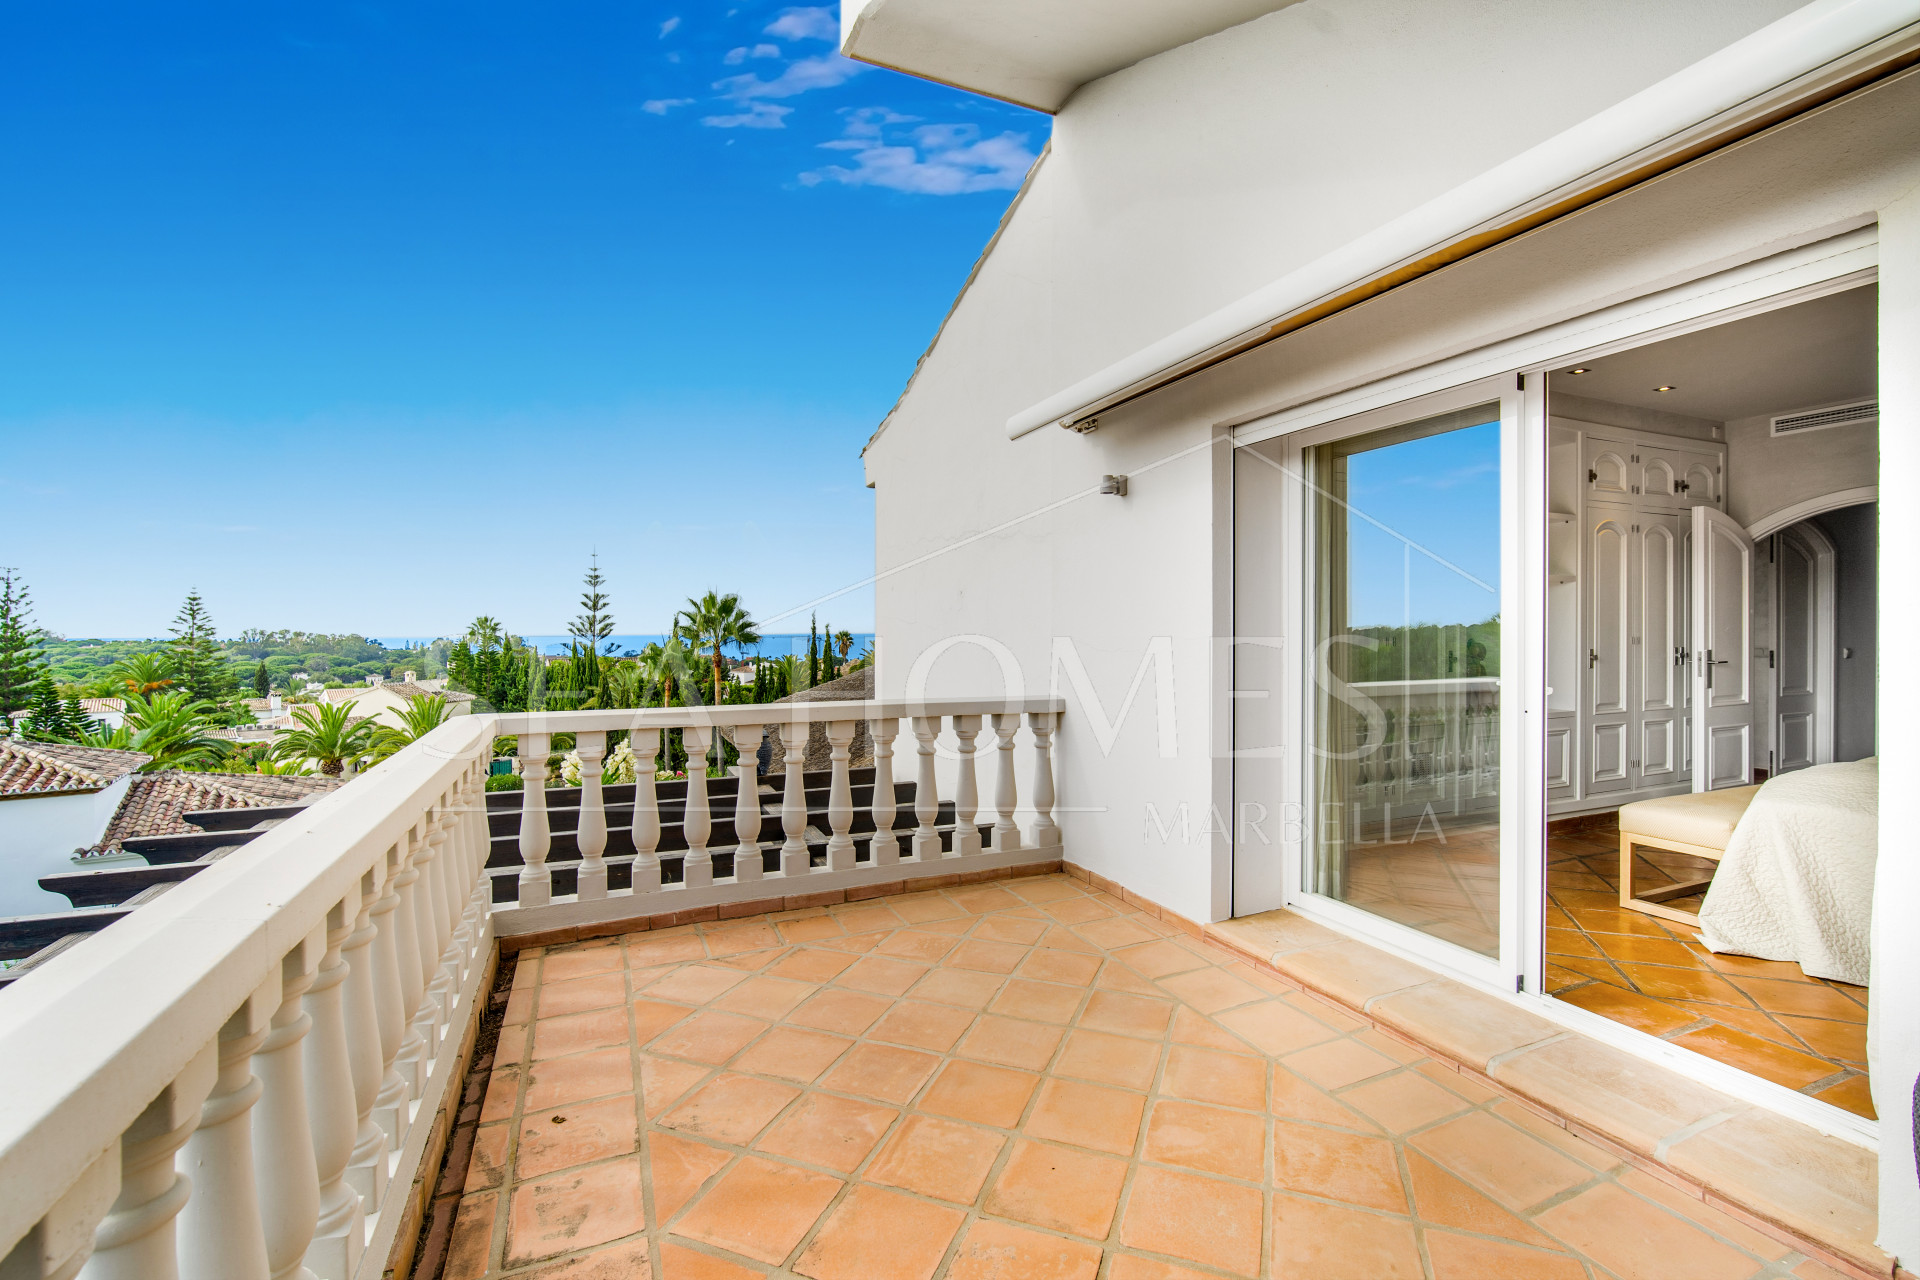 Incredible south facing, six-bedroom villa located in a quiet residential area of Elviria with magnificent sea views